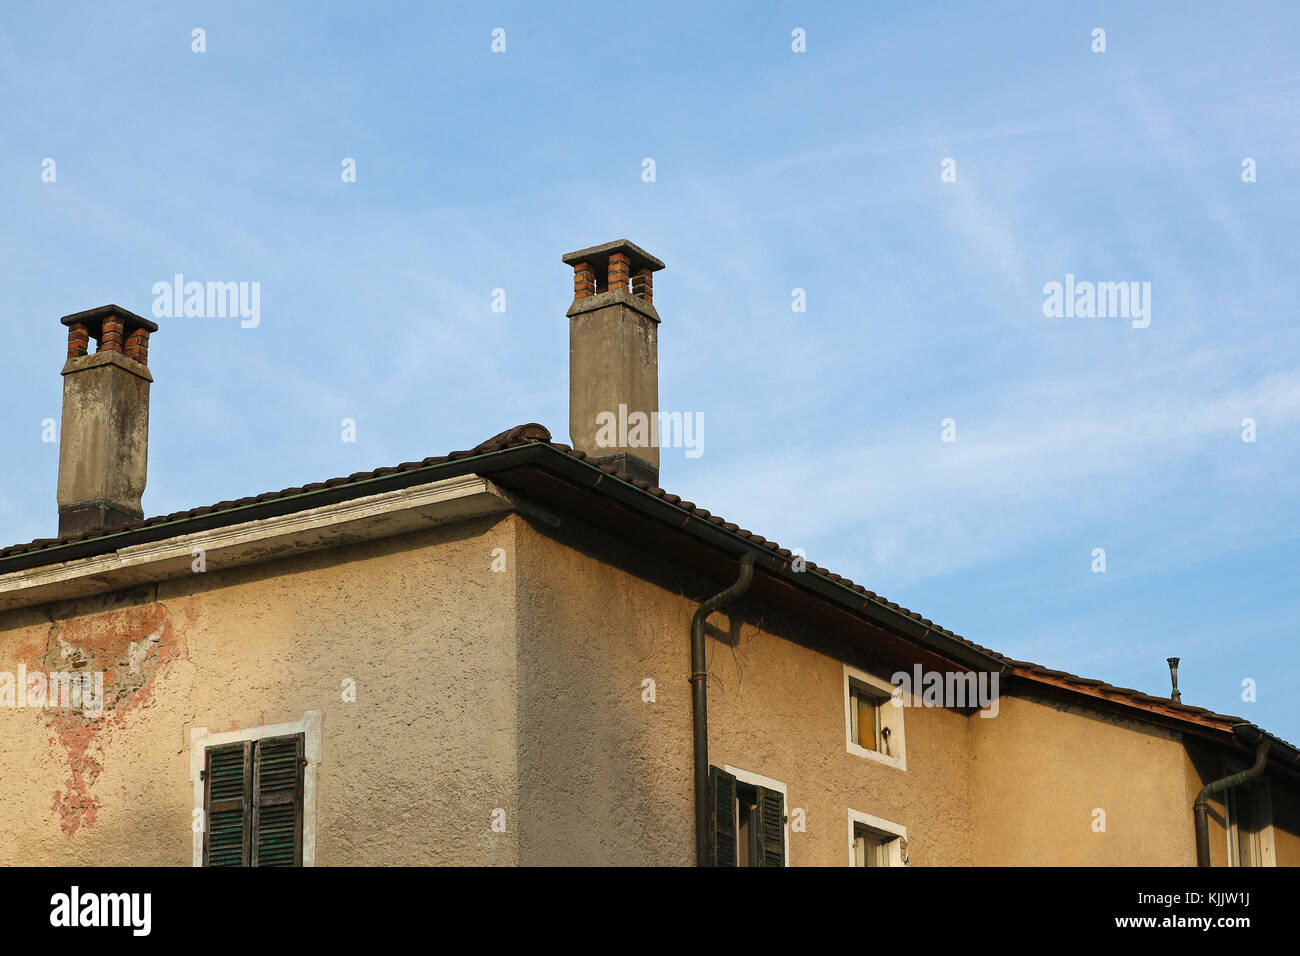 Old and decadent abandoned property roof and chimney detail against blue skies and thin white clouds Stock Photo